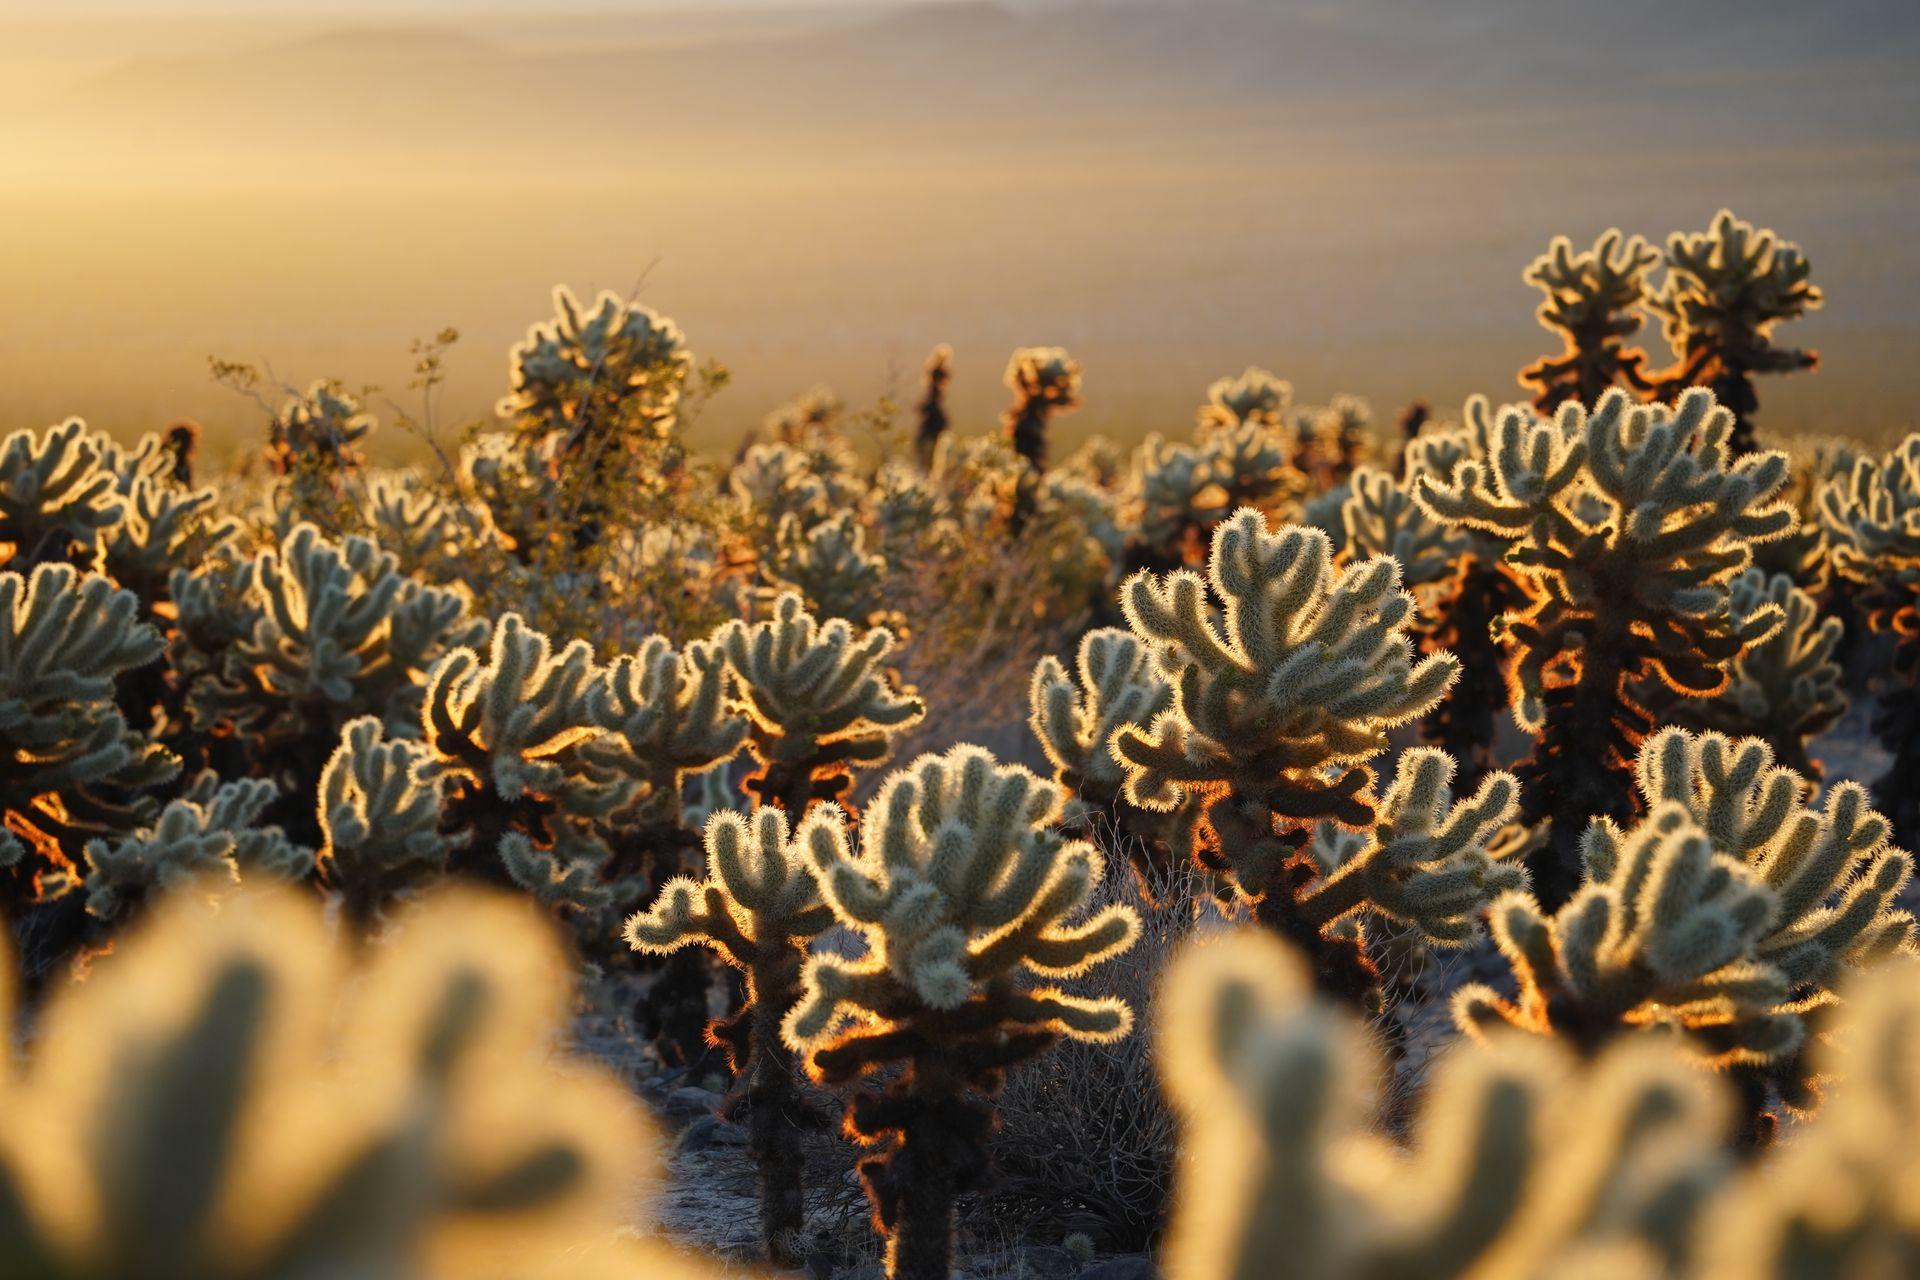 A view of cacti glowing at sunrise in the Cholla Cactus Gardens in Joshua Tree National Park